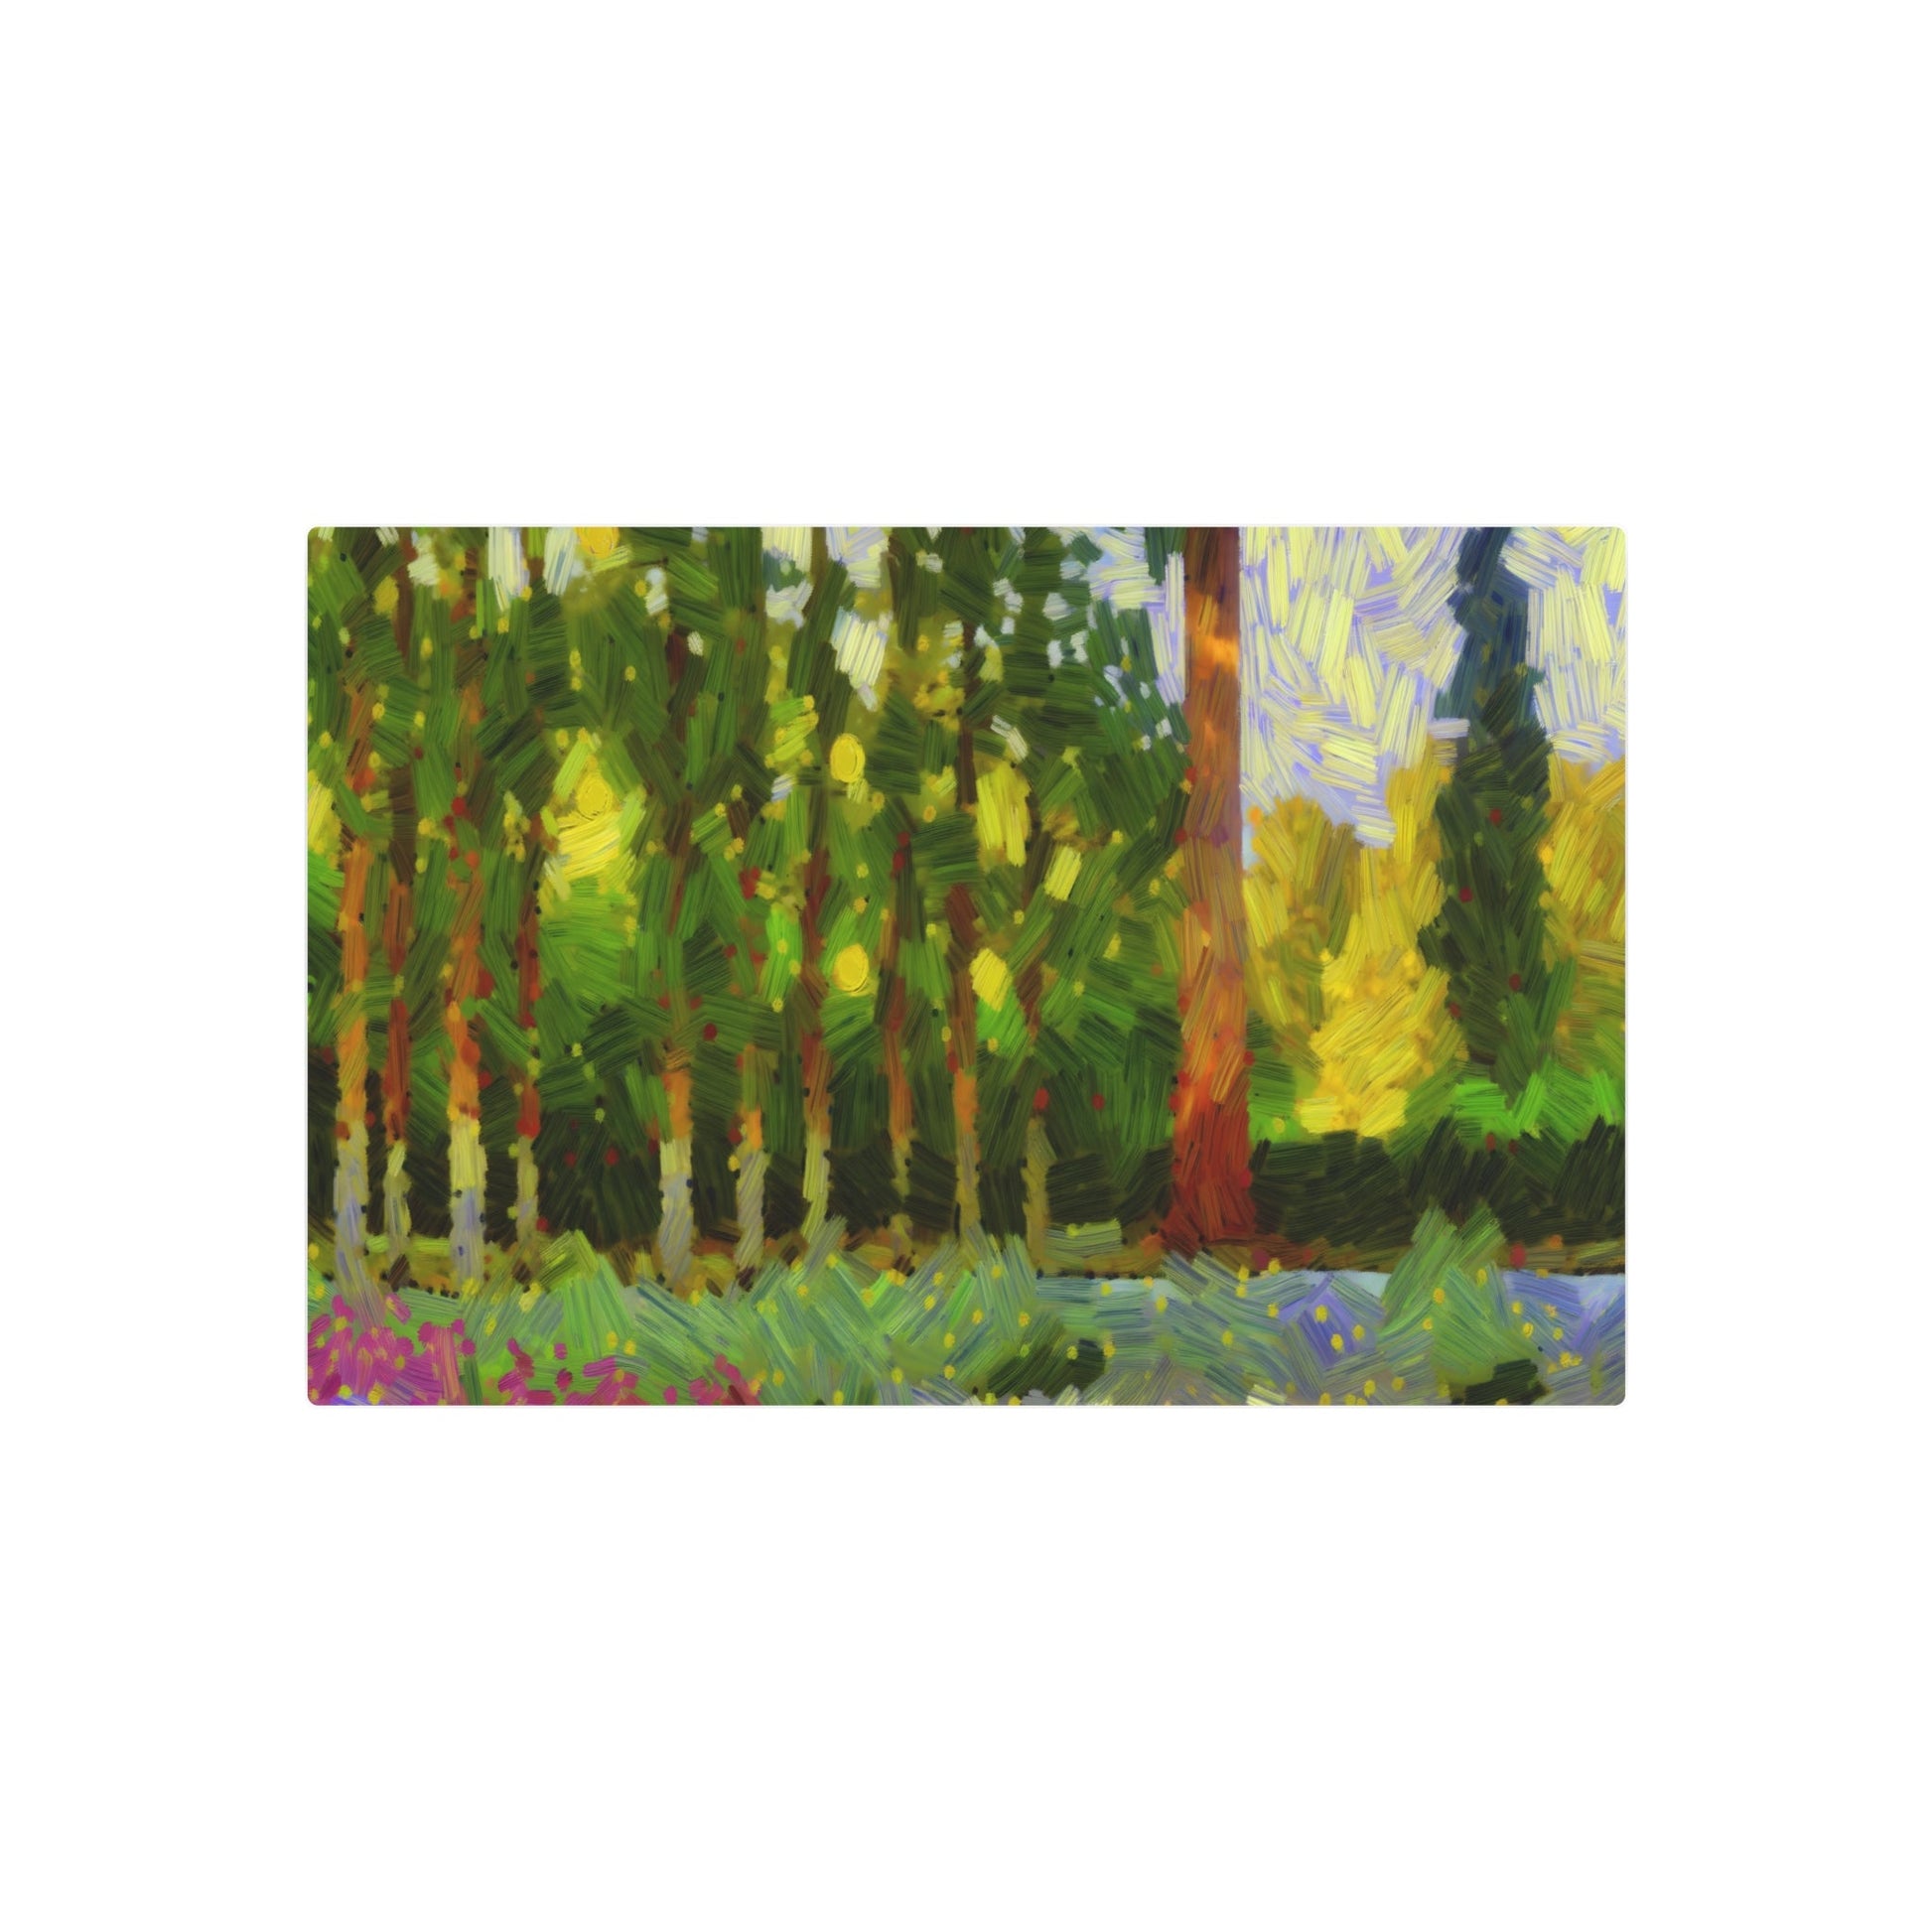 Metal Poster Art | "Impressionist Western Art Style - Vibrant Lush Forest with Towering Trees and Sunlight Filtering Through Leaves Painting" - Metal Poster Art 30″ x 20″ (Horizontal) 0.12''